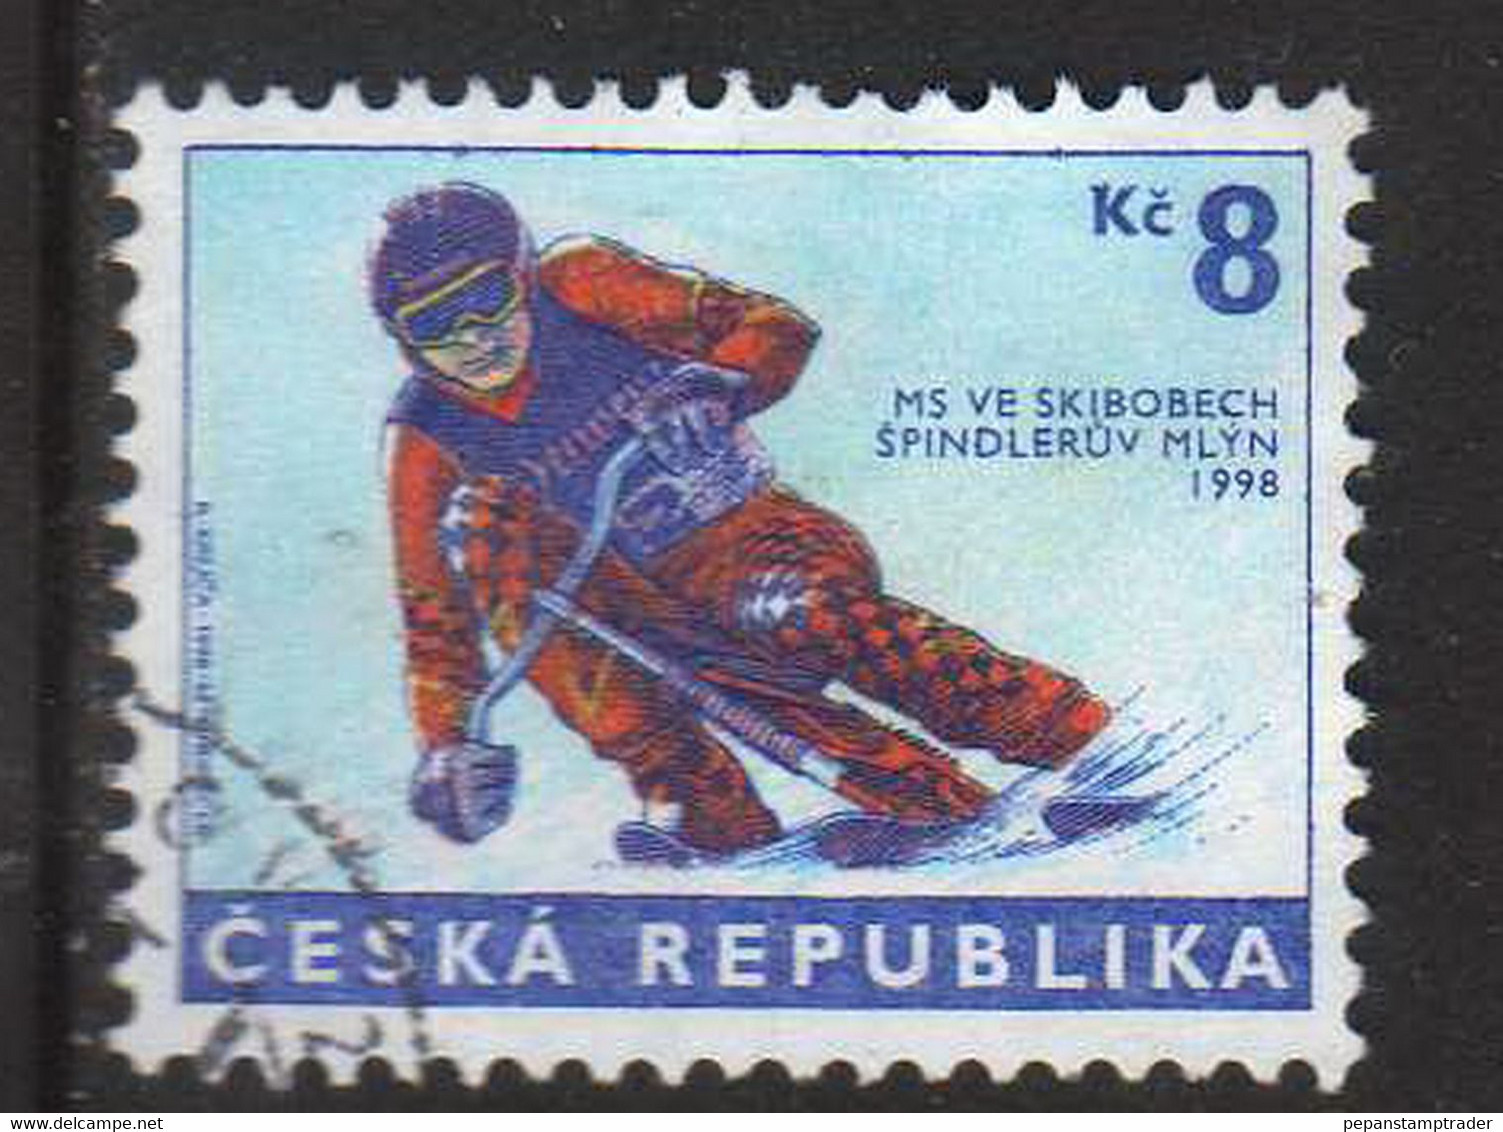 Czech Republic - #3035 - Used - Used Stamps